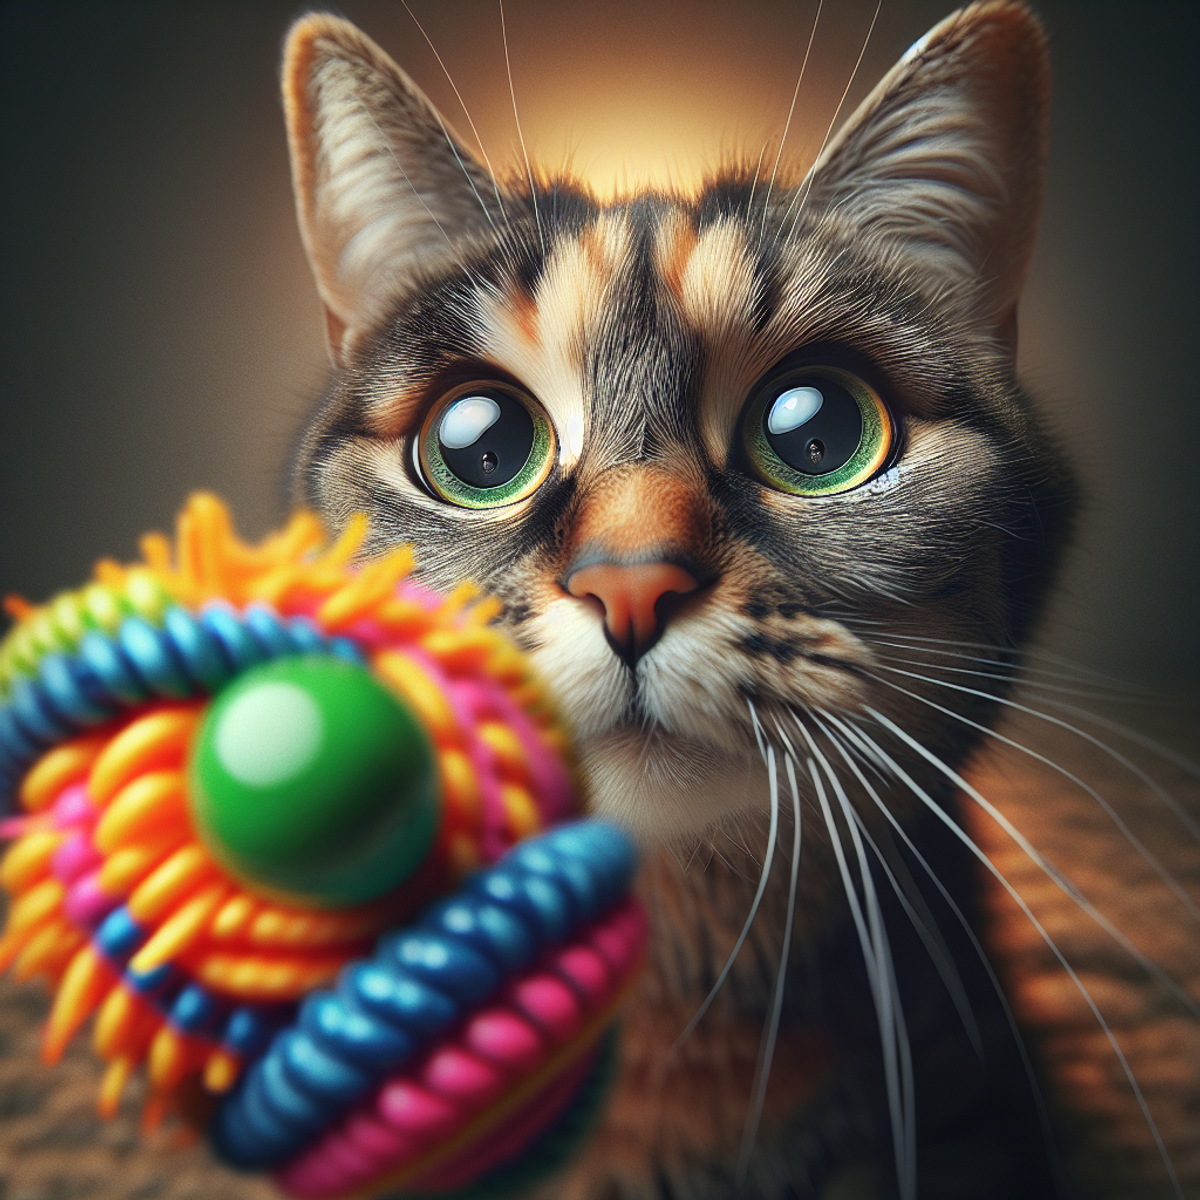 An elderly cat with bright eyes and perked ears playing with a colorful toy.